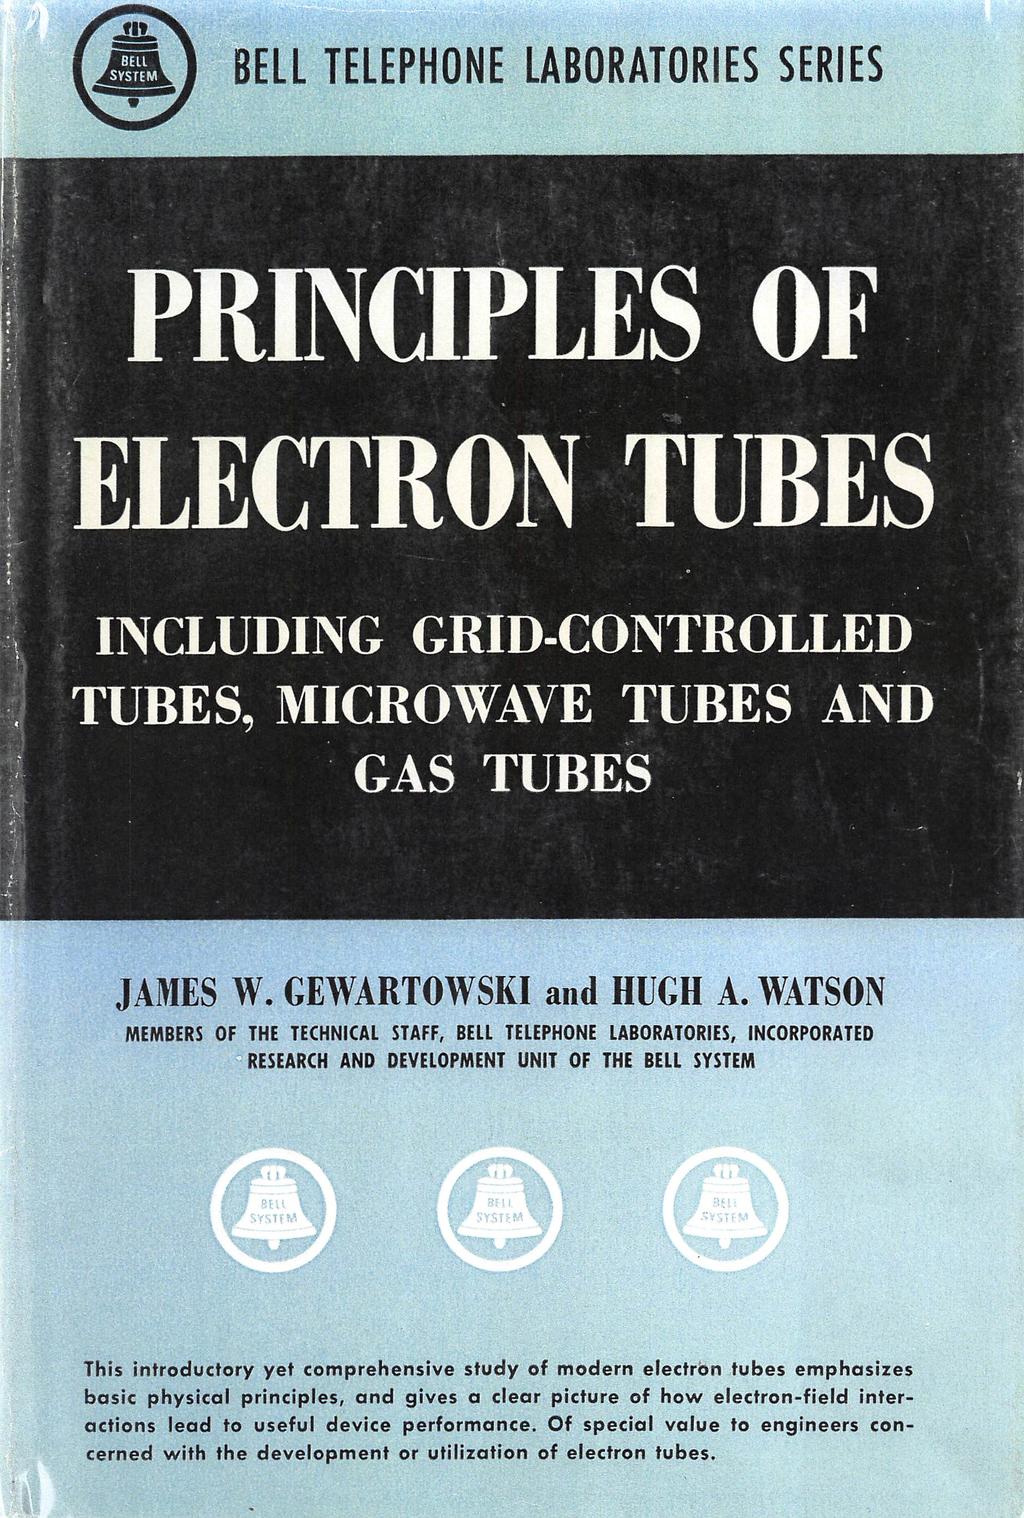 BELL TELEPHONE LABORATORIES SERIES PRINaPLES OF ELECTRON TERES INCLUDING GRID-CONTROLLED TUBES, MICROWAVE TUBES AND G A S T U B E S JAMES W. GEWARTOWSKI and HUGH A.